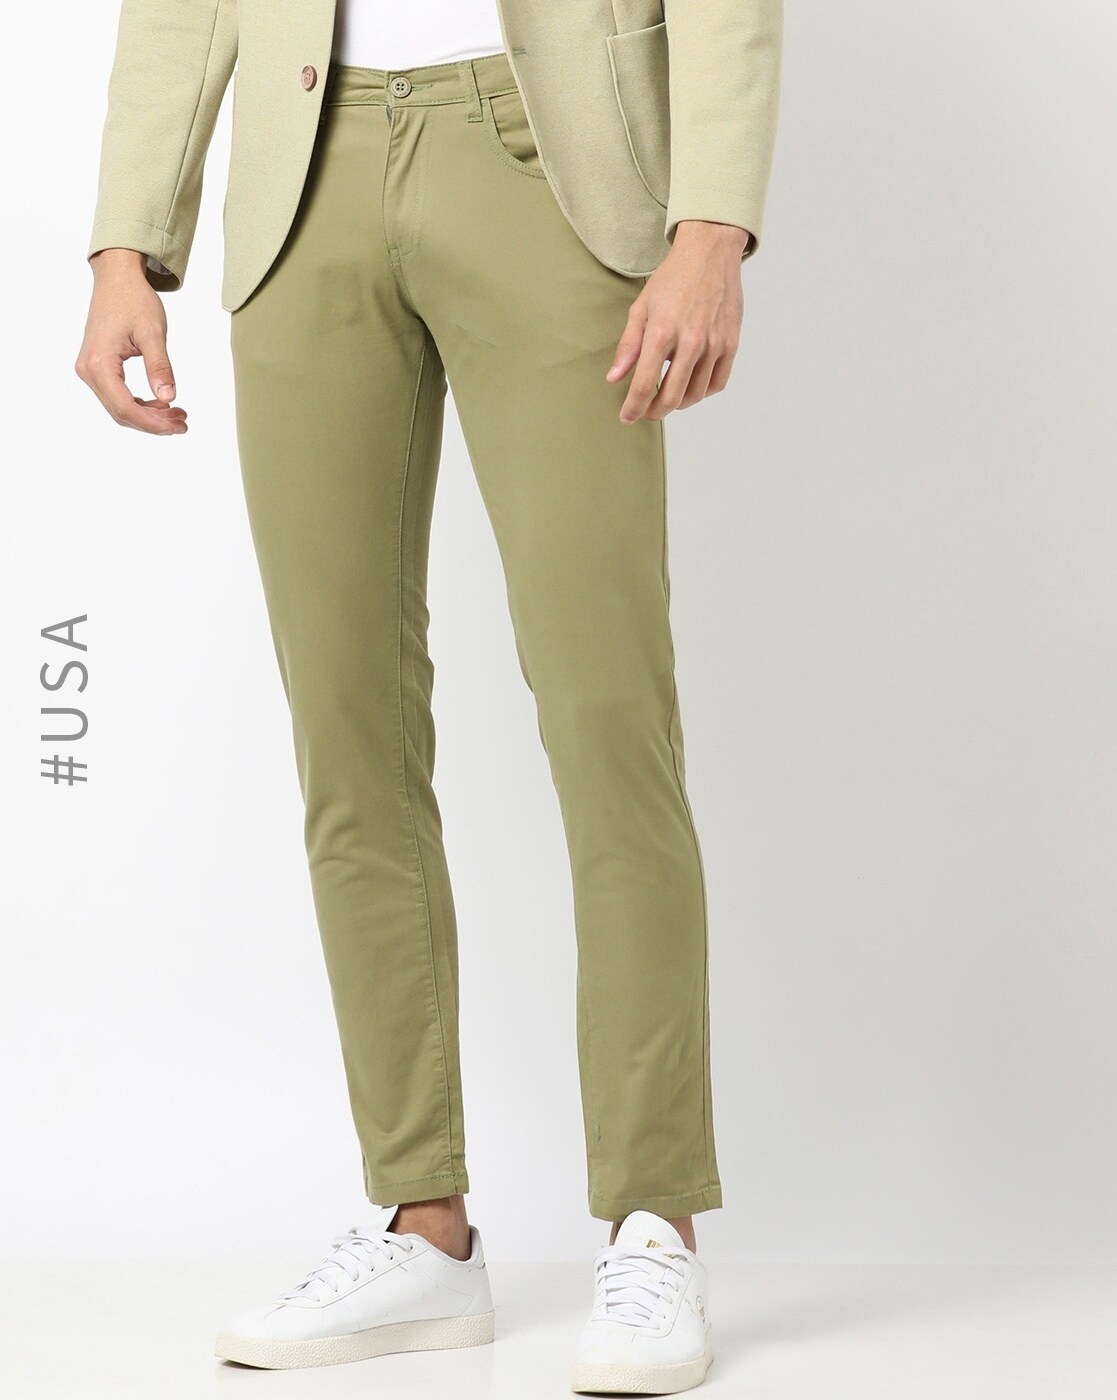 Women Solid Olive Green Stretch Ponte Pants